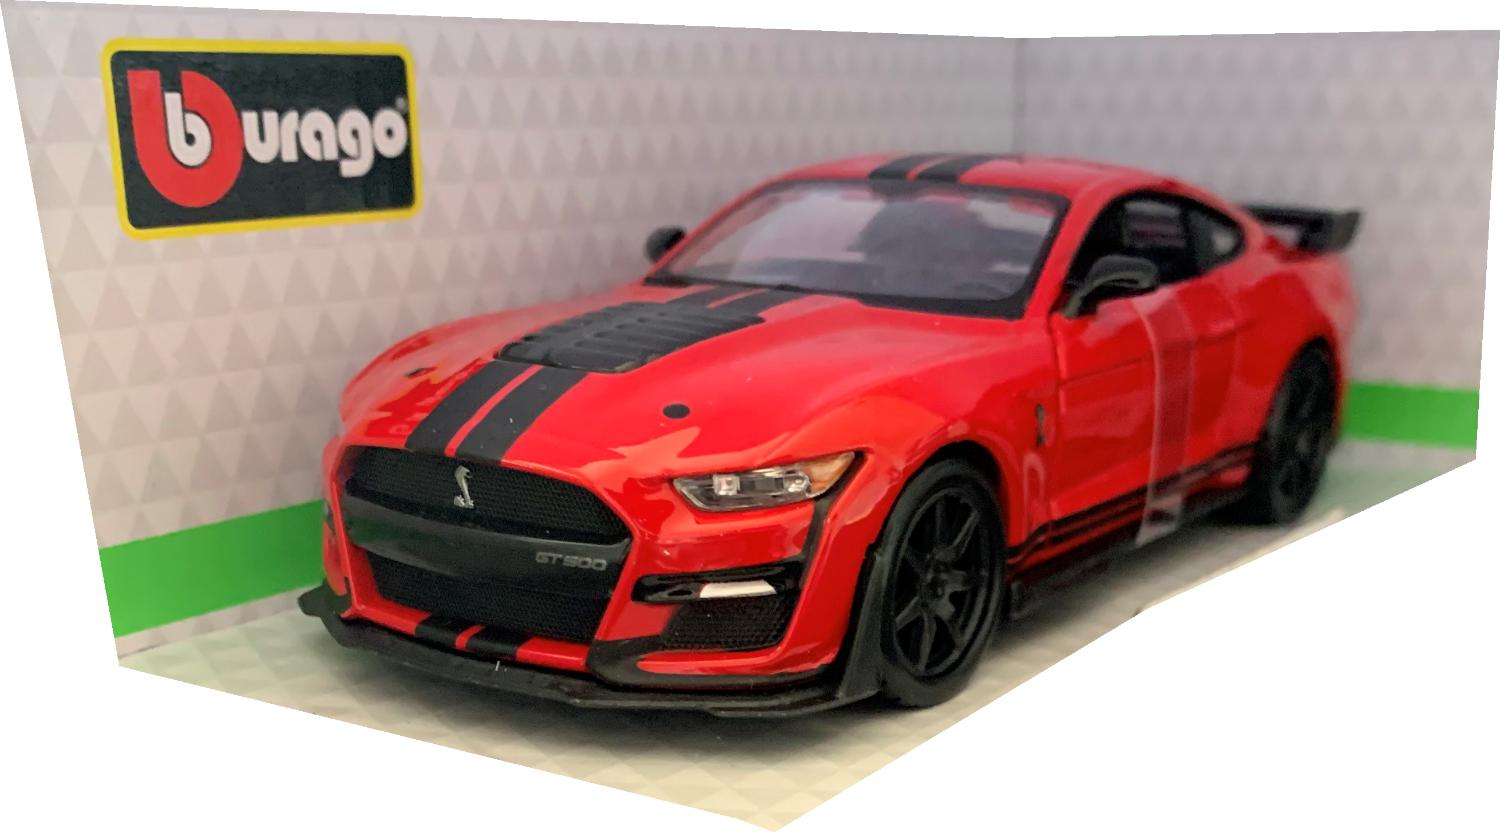 Ford Mustang Shelby GT500 2020 1:32 scale model from Bburago